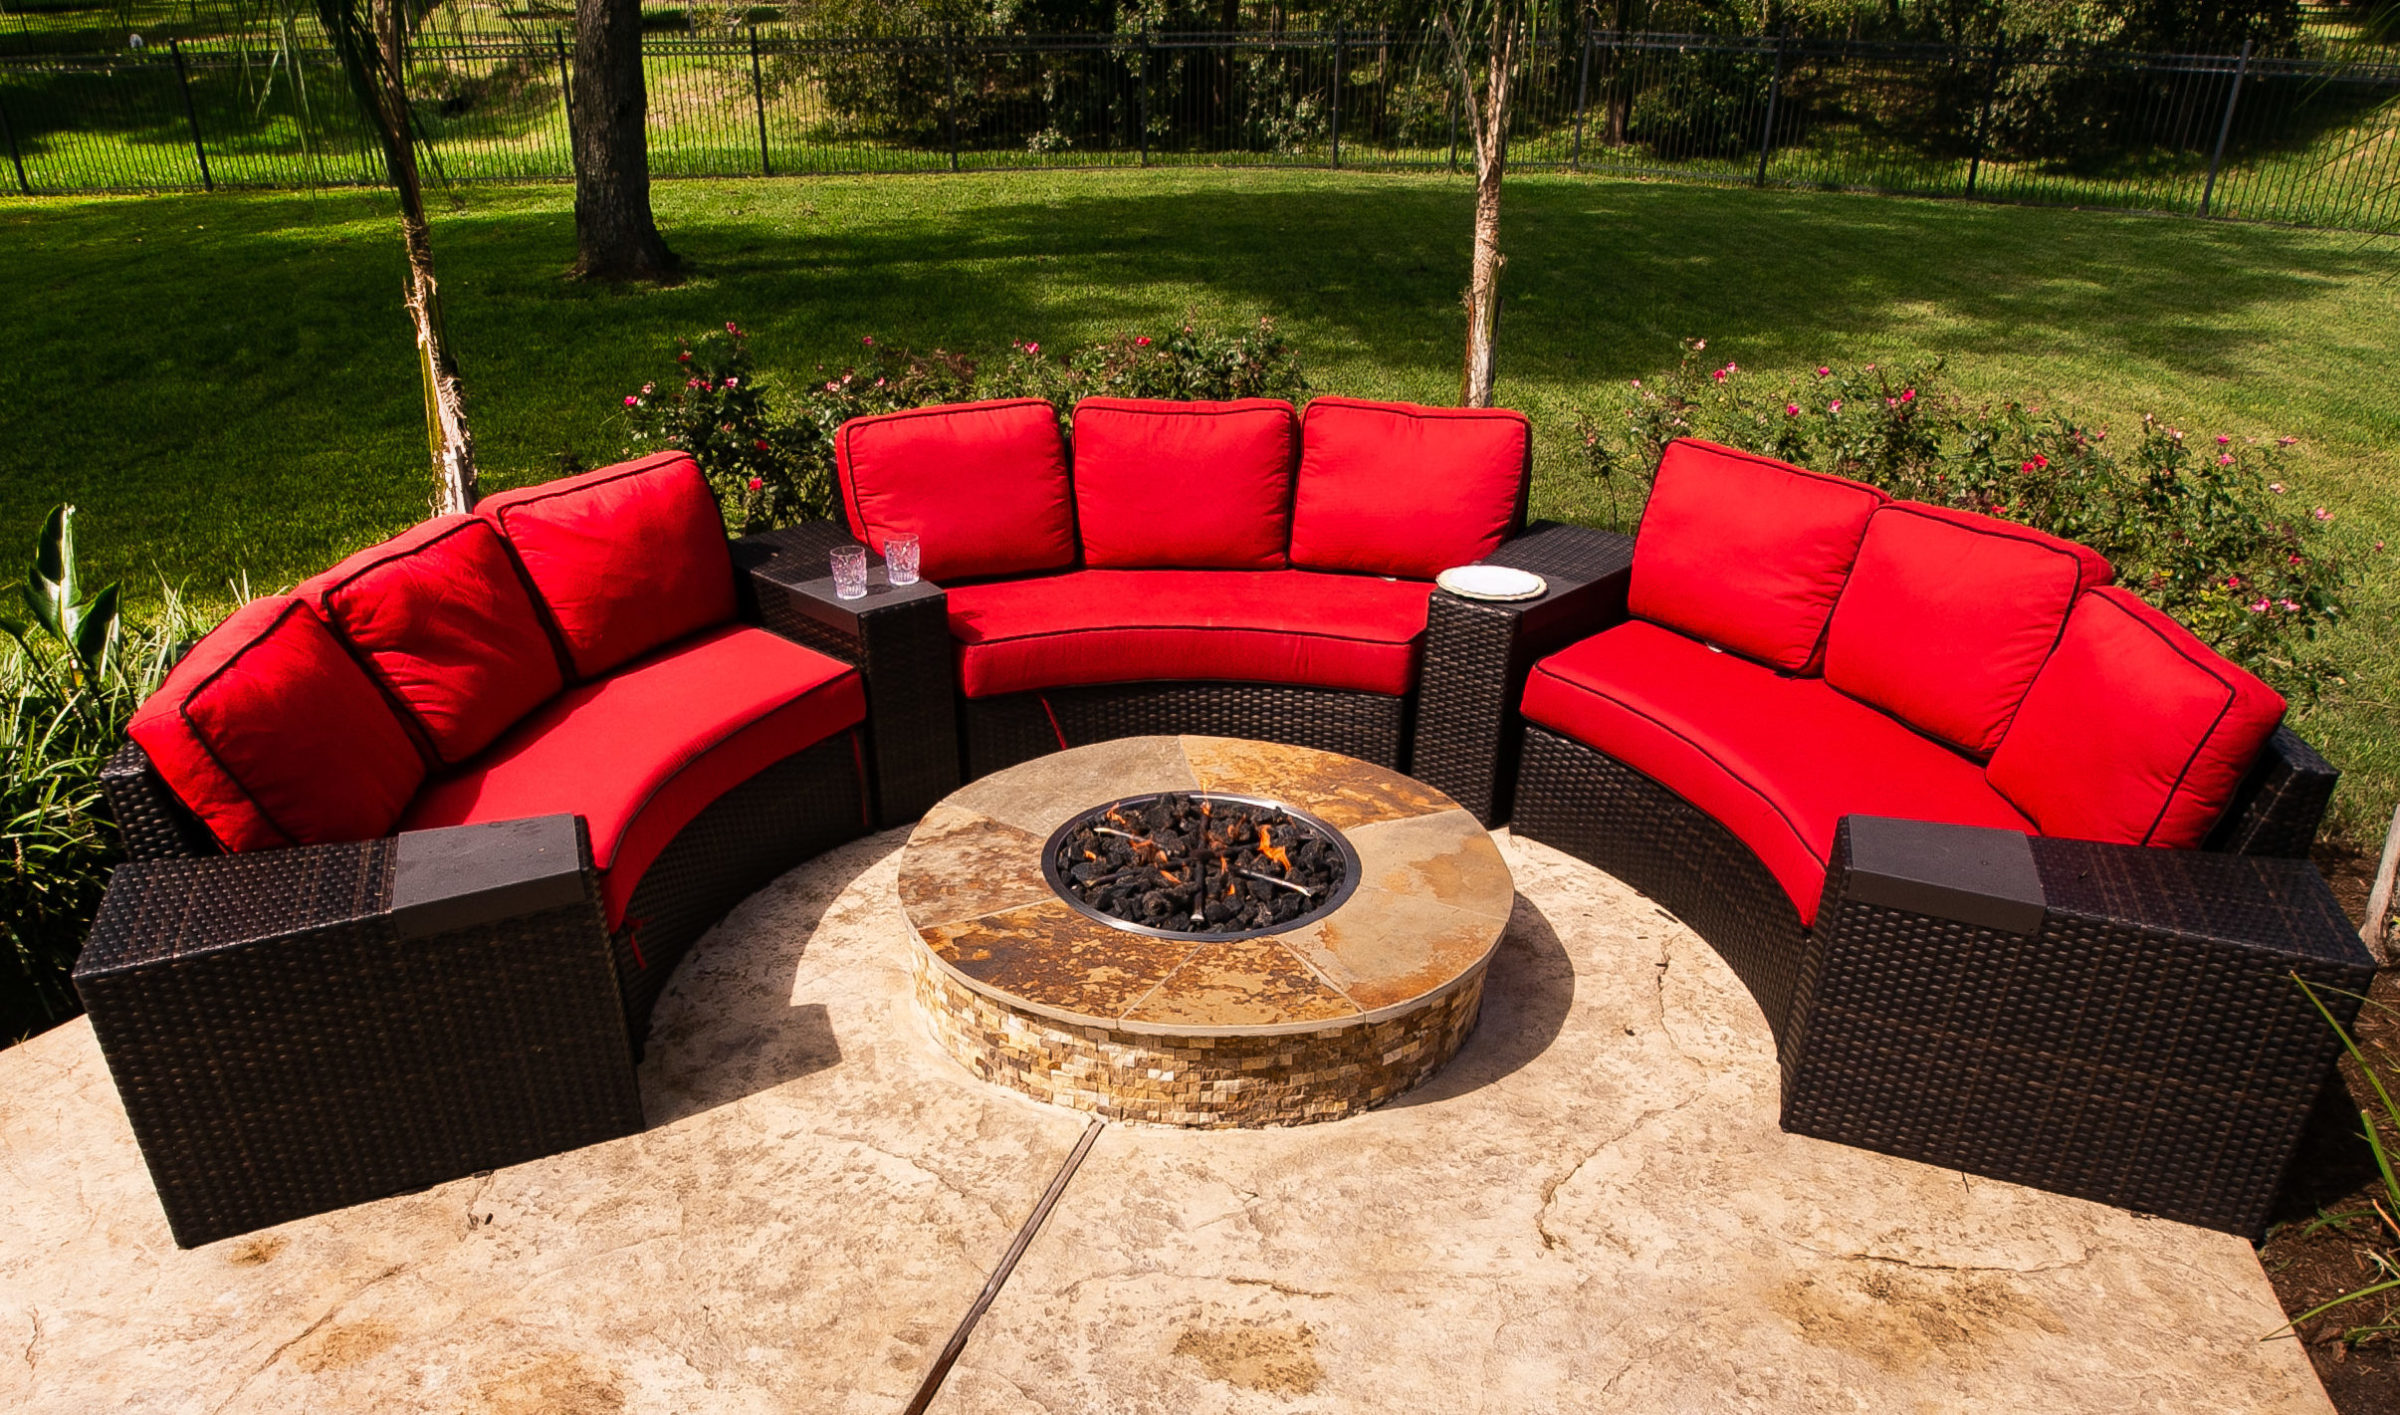 Patio Furniture - Making Your Backyard an Outdoor Family Room